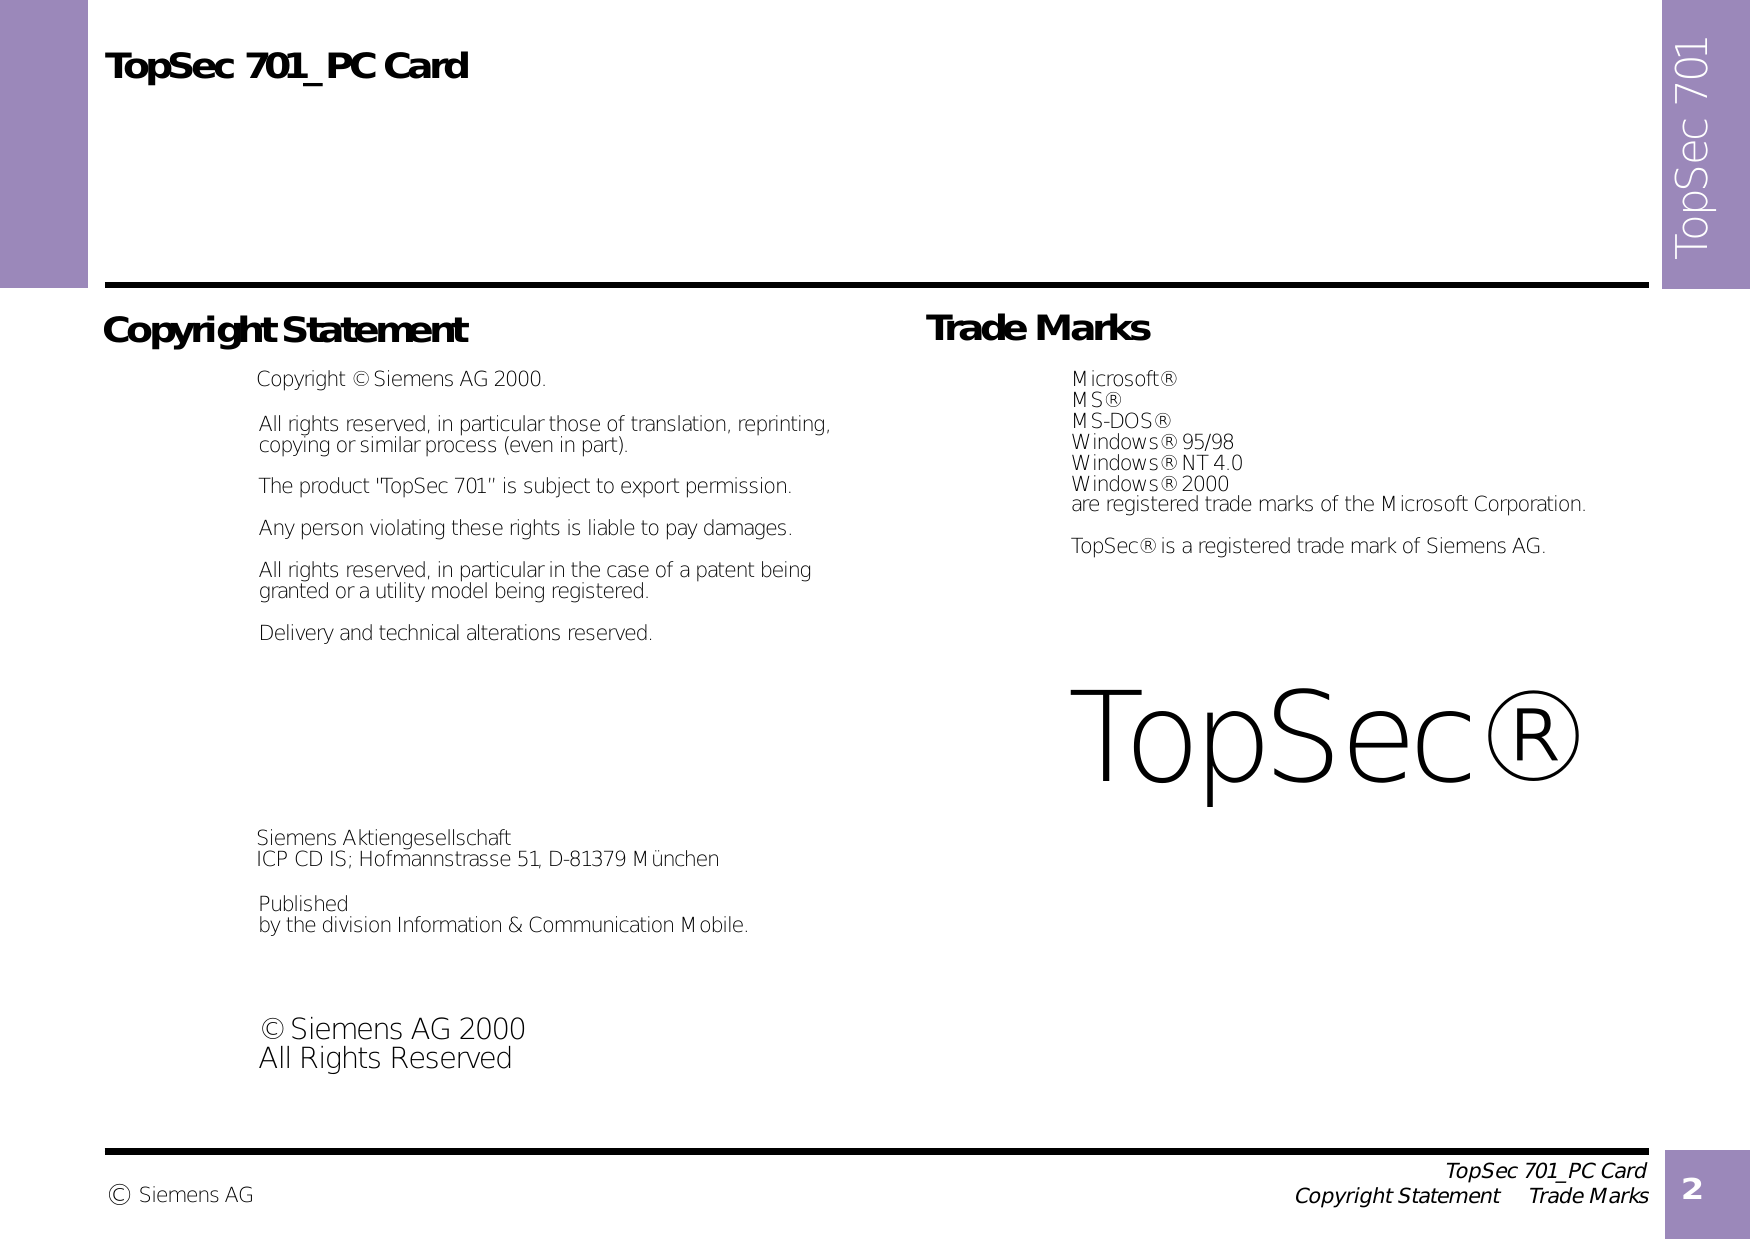 2                                        TopSec 701_PC Card               Copyright Statement     Trade MarksSiemens AG©Microsoft®MS®MS-DOS® Windows® 95/98 Windows® NT 4.0 Windows® 2000 Copyright © Siemens AG 2000. Siemens AktiengesellschaftICP CD IS; Hofmannstrasse 51, D-81379 München © Siemens AG 2000All Rights ReservedTopSec®TopSec 701TopSec 701_PC CardCopyright Statement Trade MarksAll rights reserved, in particular those of translation, reprinting,copying or similar process (even in part).Any person violating these rights is liable to pay damages.All rights reserved, in particular in the case of a patent being granted or a utility model being registered. Delivery and technical alterations reserved.Publishedby the division Information &amp; Communication Mobile.are registered trade marks of the Microsoft Corporation.TopSec® is a registered trade mark of Siemens AG.The product &quot;TopSec 701” is subject to export permission.